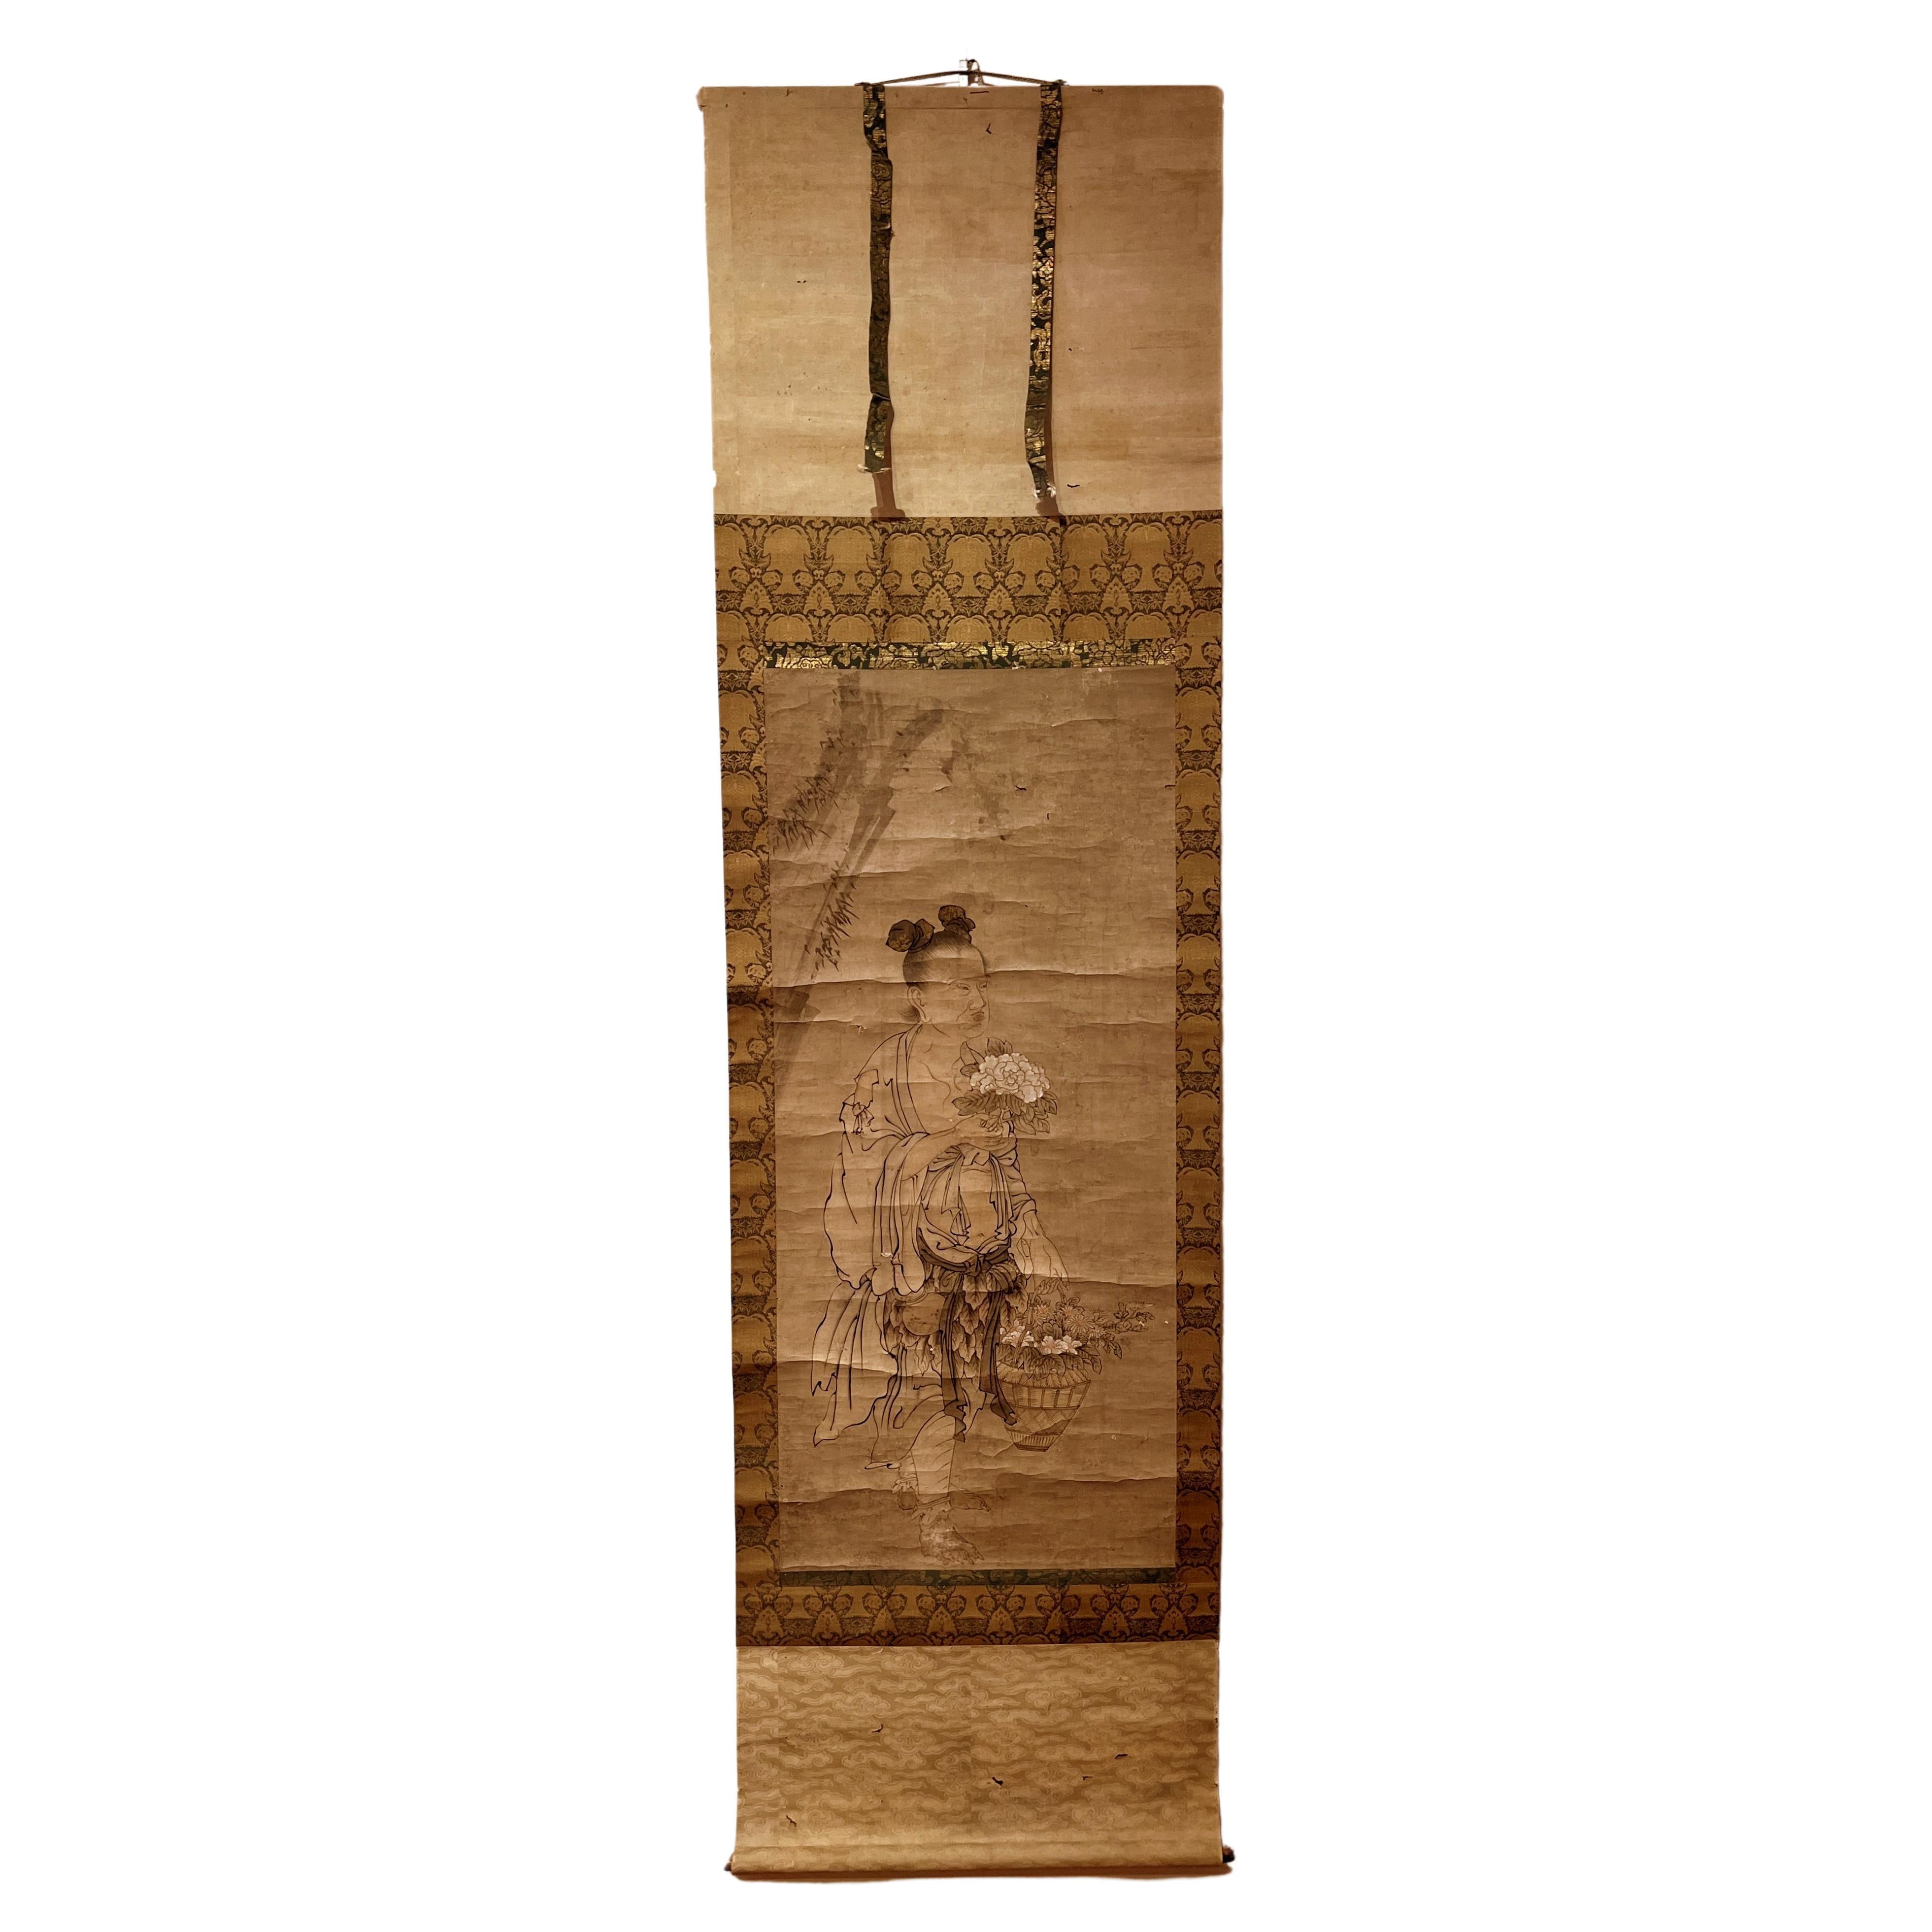 Japanese Scroll Painting of Countryside Person Carry Basket of Flowers For Sale